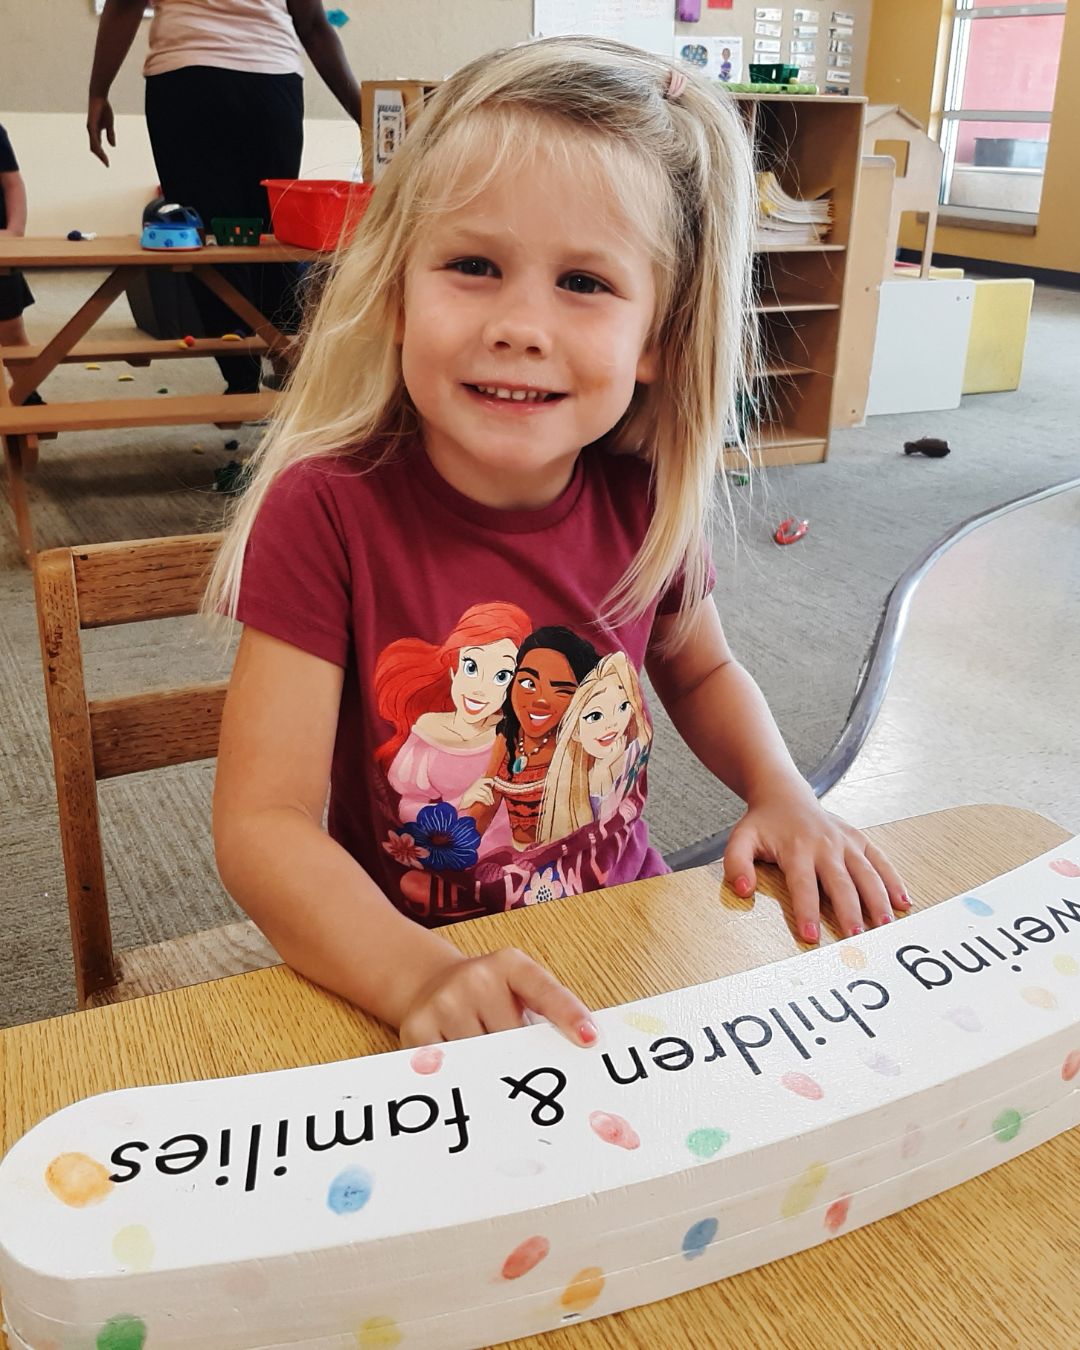 A young girl smiling at a table as she puts her hand on a piece of artwork.